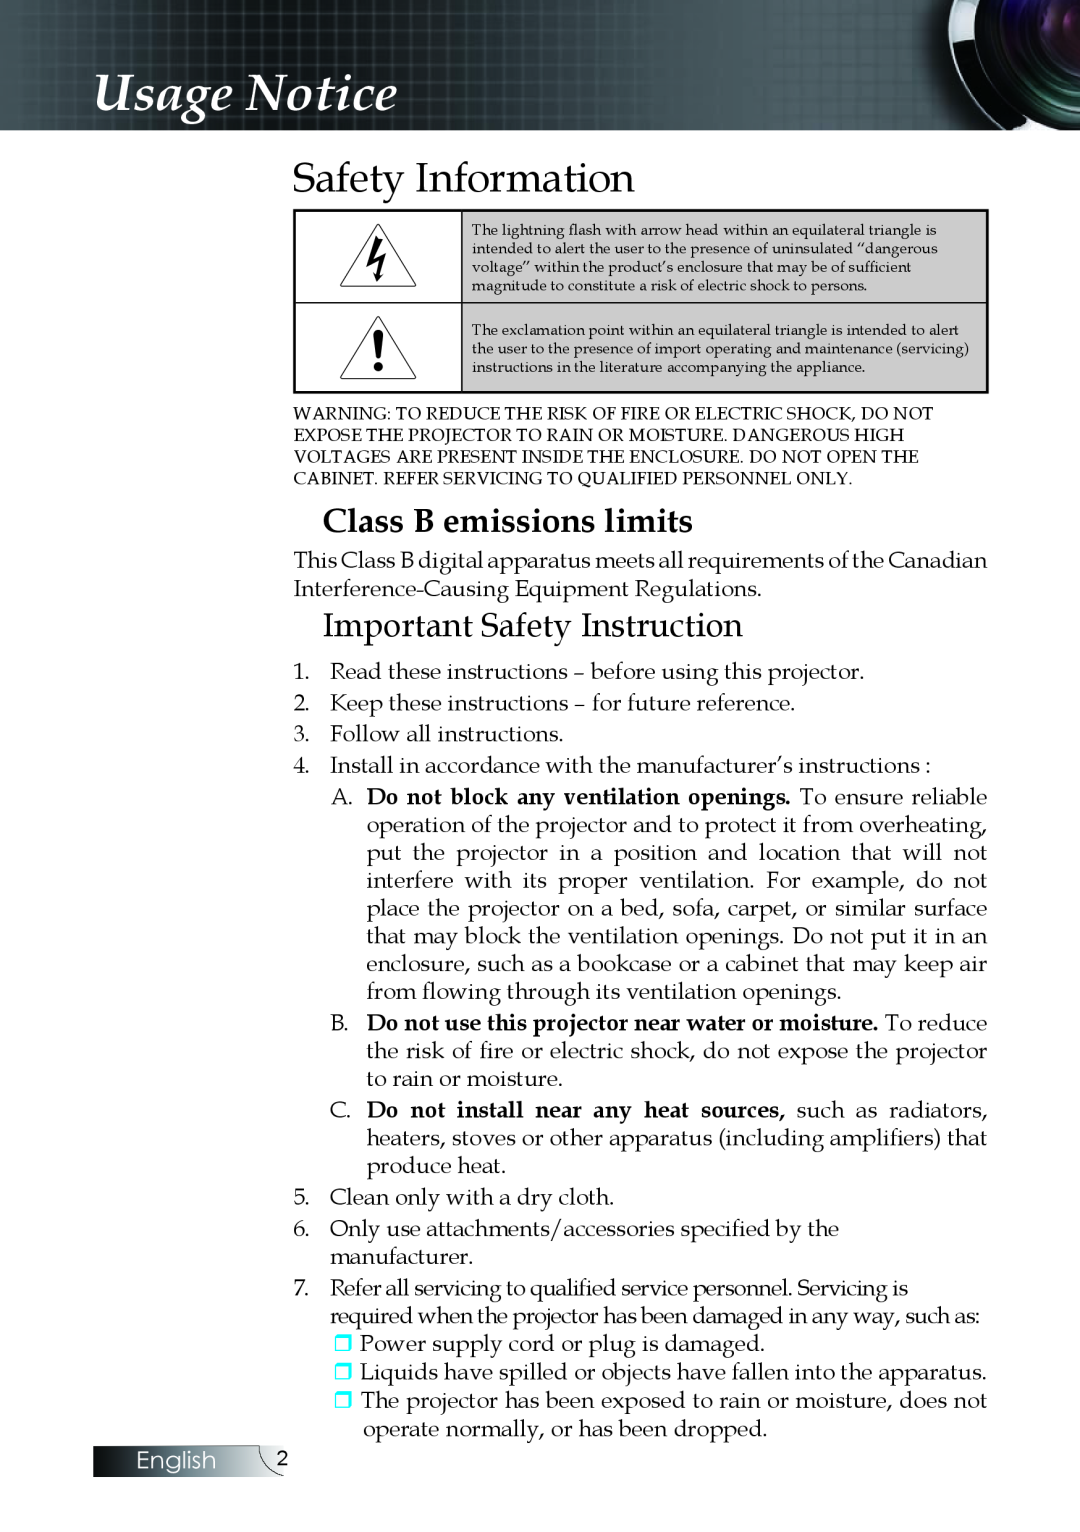 Optoma Technology W304M Usage Notice, Safety Information, Class B emissions limits, Important Safety Instruction, English 